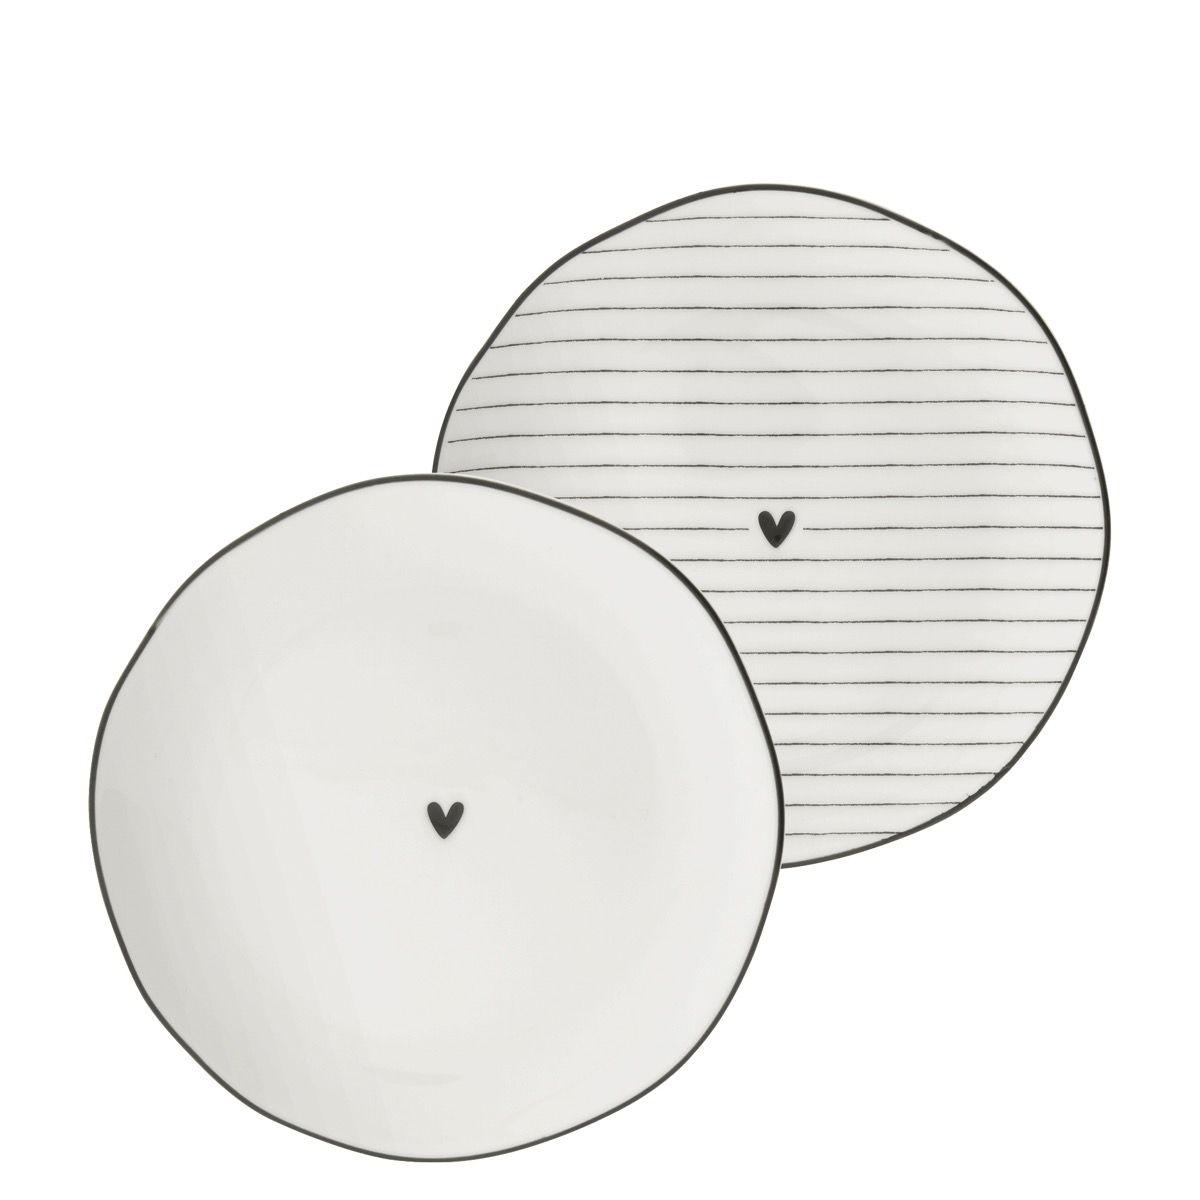 BC Side Plate white heart black 13cm Decolicious